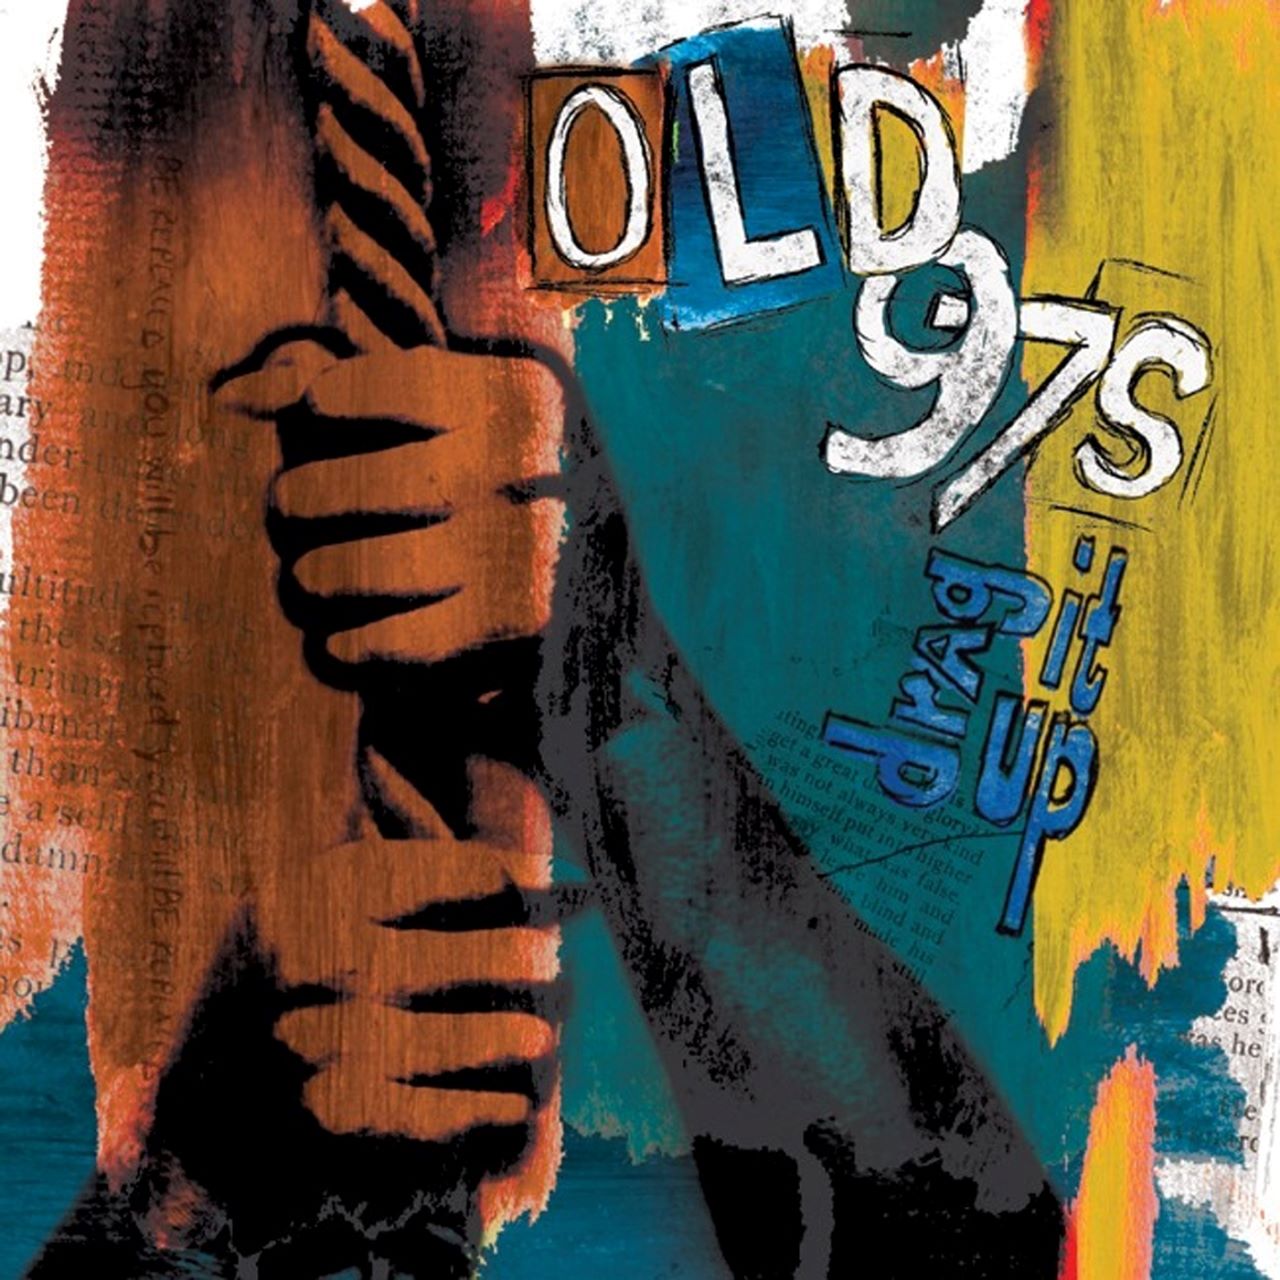 Old 97’s - Drag It Up cover album